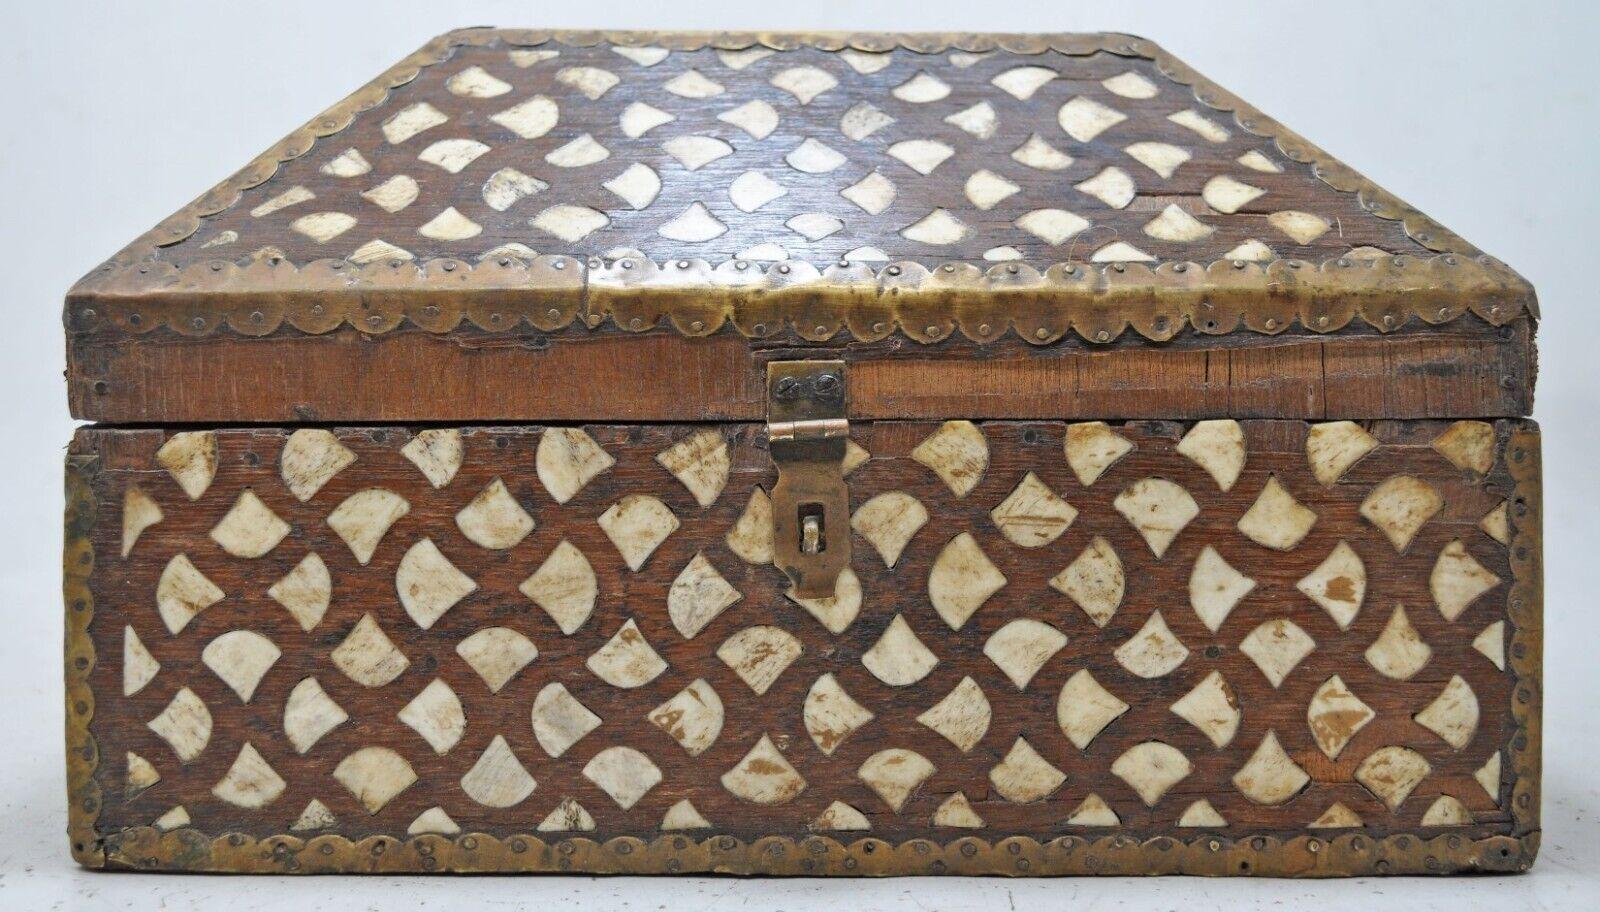 Antique Hand-Crafted Decorative Box with Distinctive Bone Inlay Pattern and Nailed Brass Trim

Anonymous
India; early-to-mid 20th century
Wood, bone and brass

Approximate size: 12.2 x 9.2 x 6.8 in.

A distinctive rustic dome-lidded box suitable for